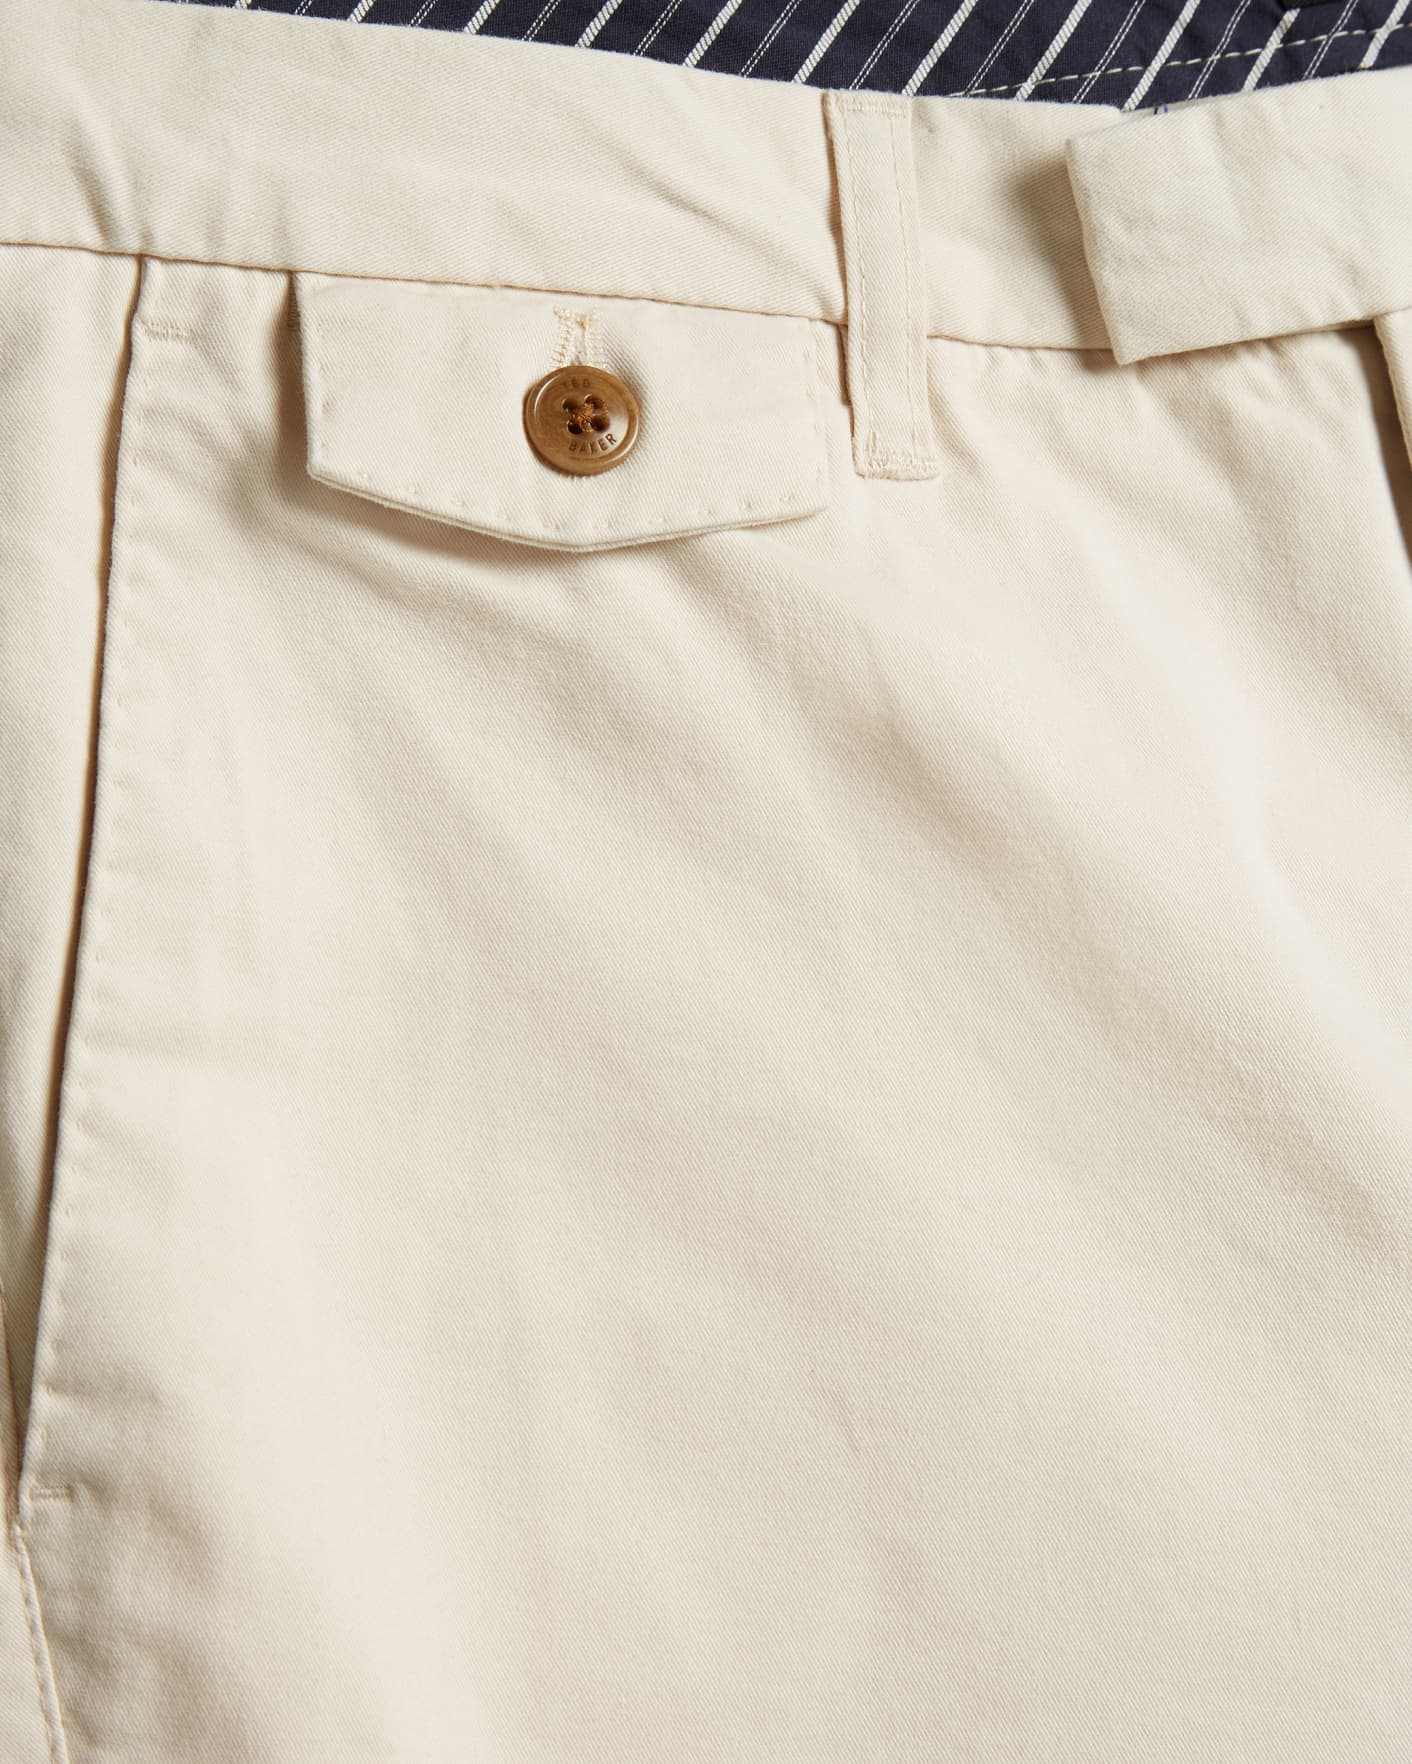 Blanco Chino Slim Fit Ted Baker